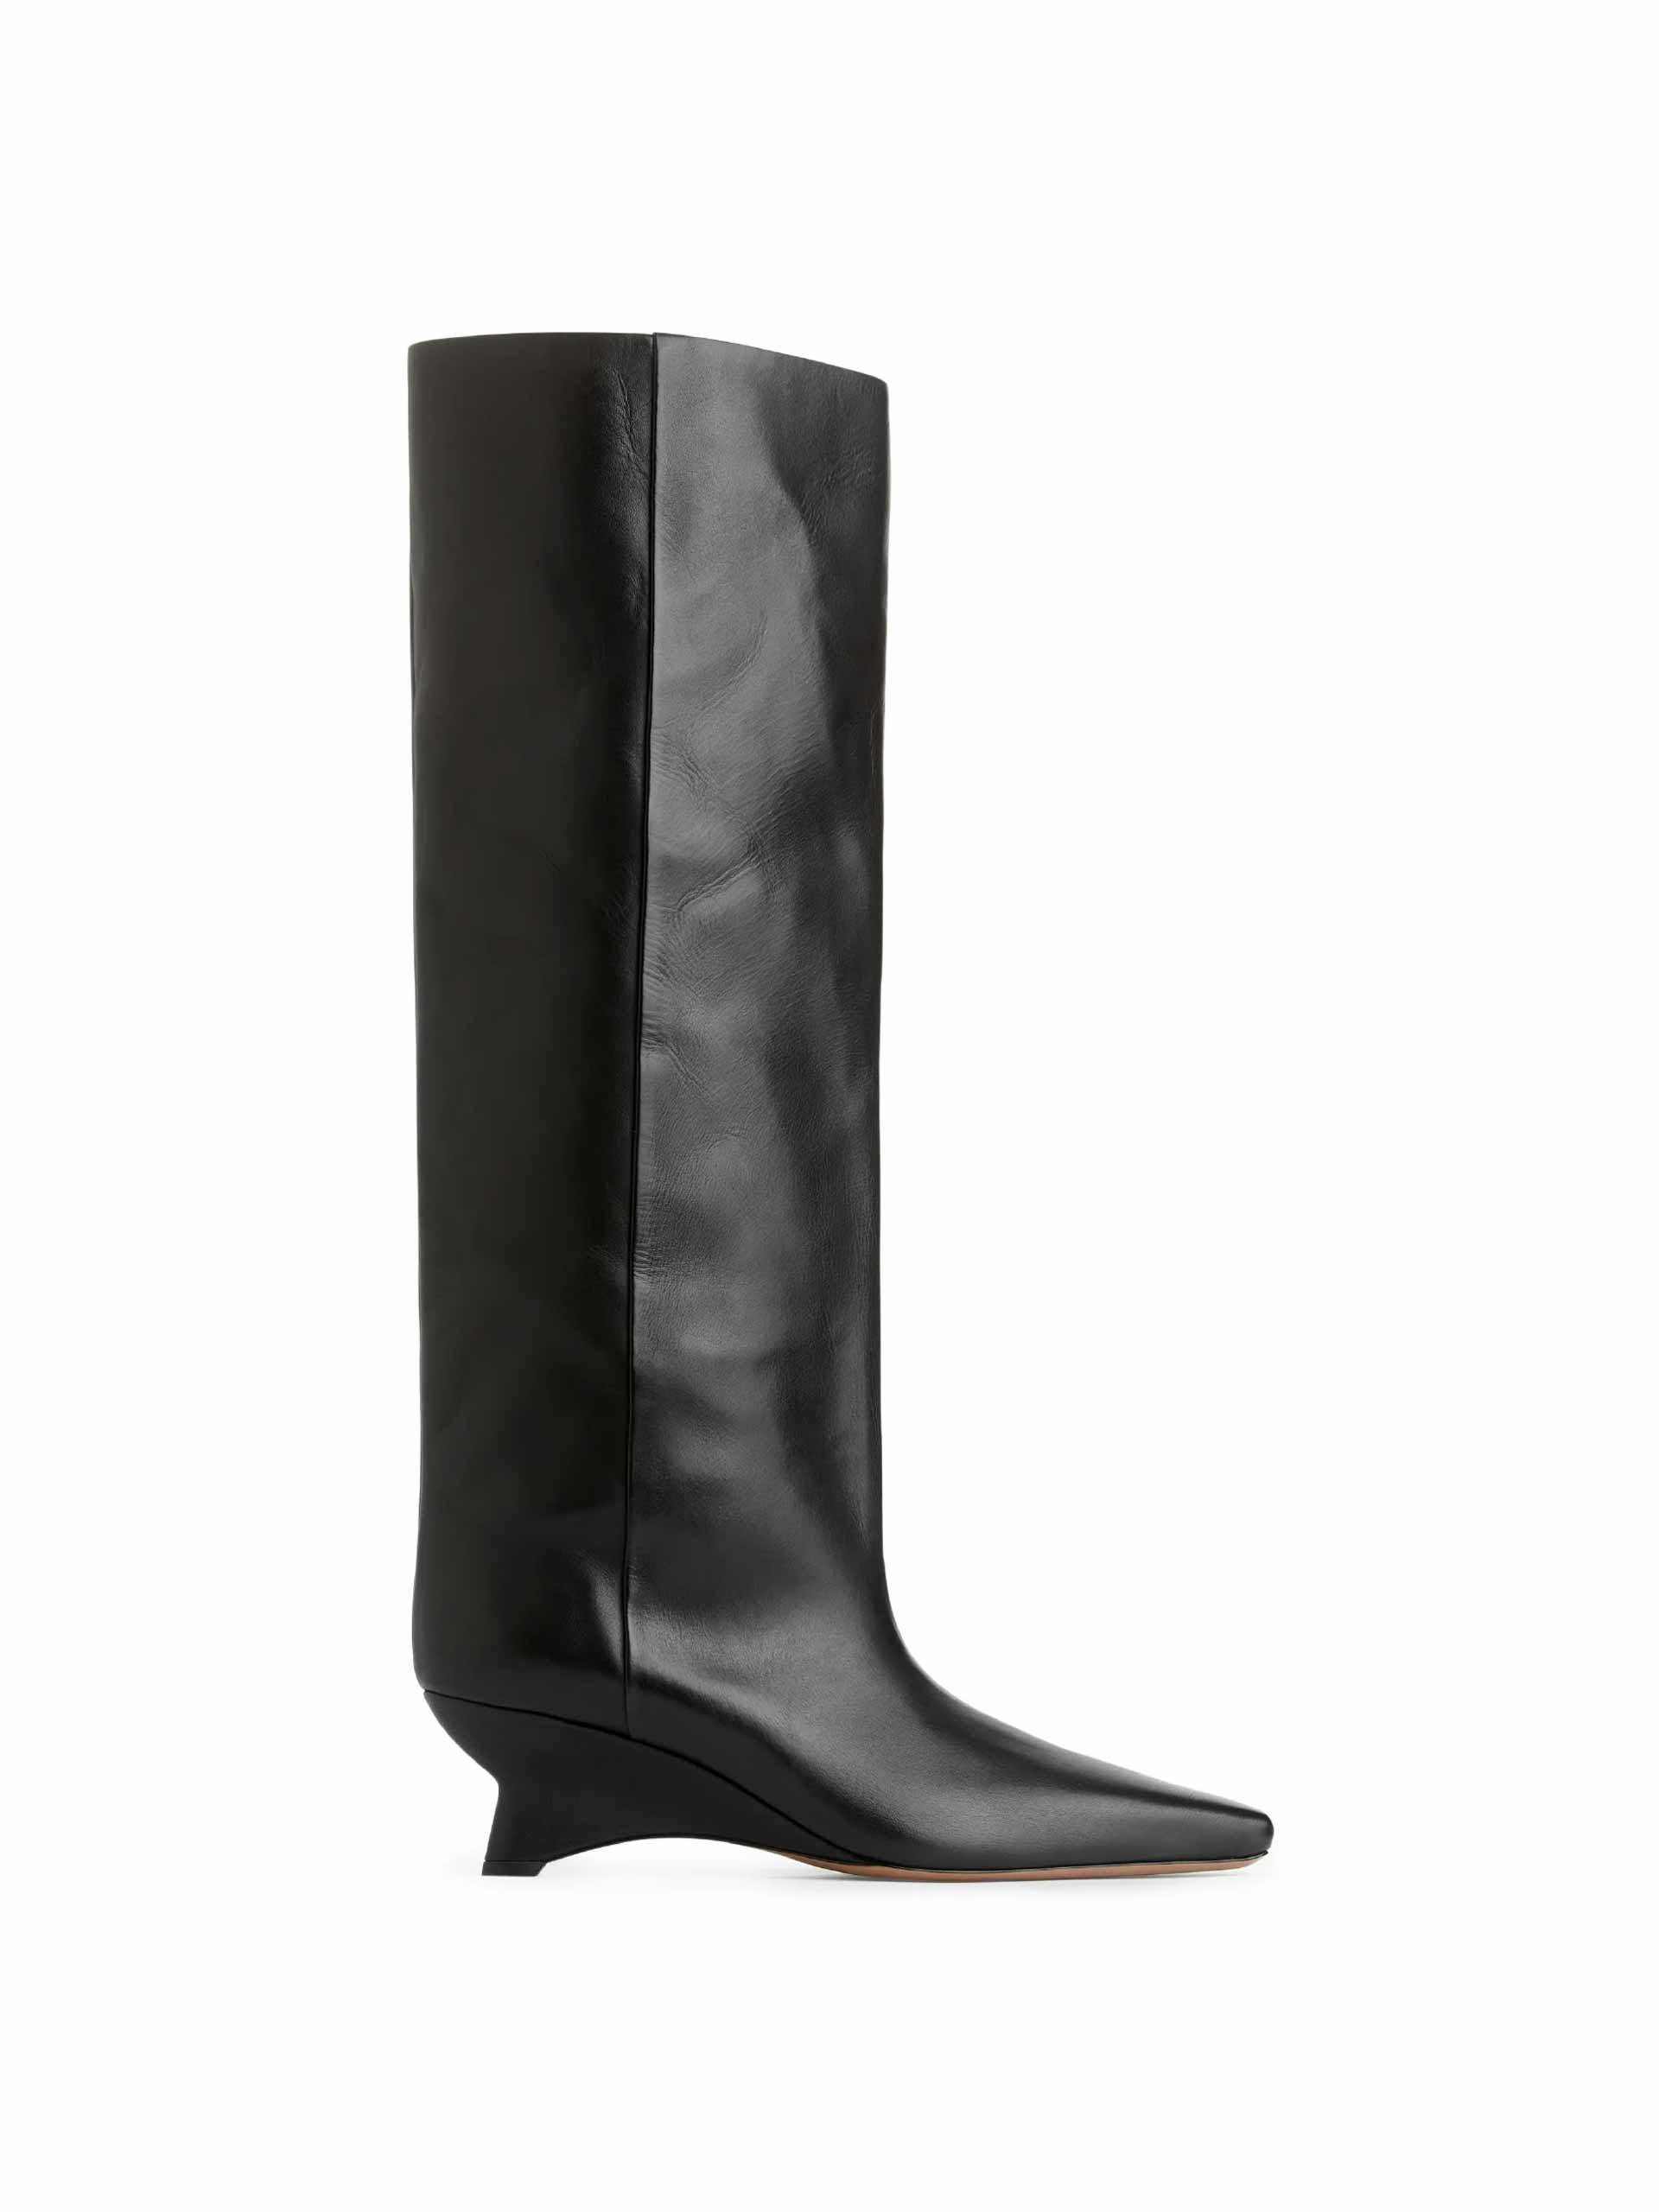 Wide-shafted leather boots